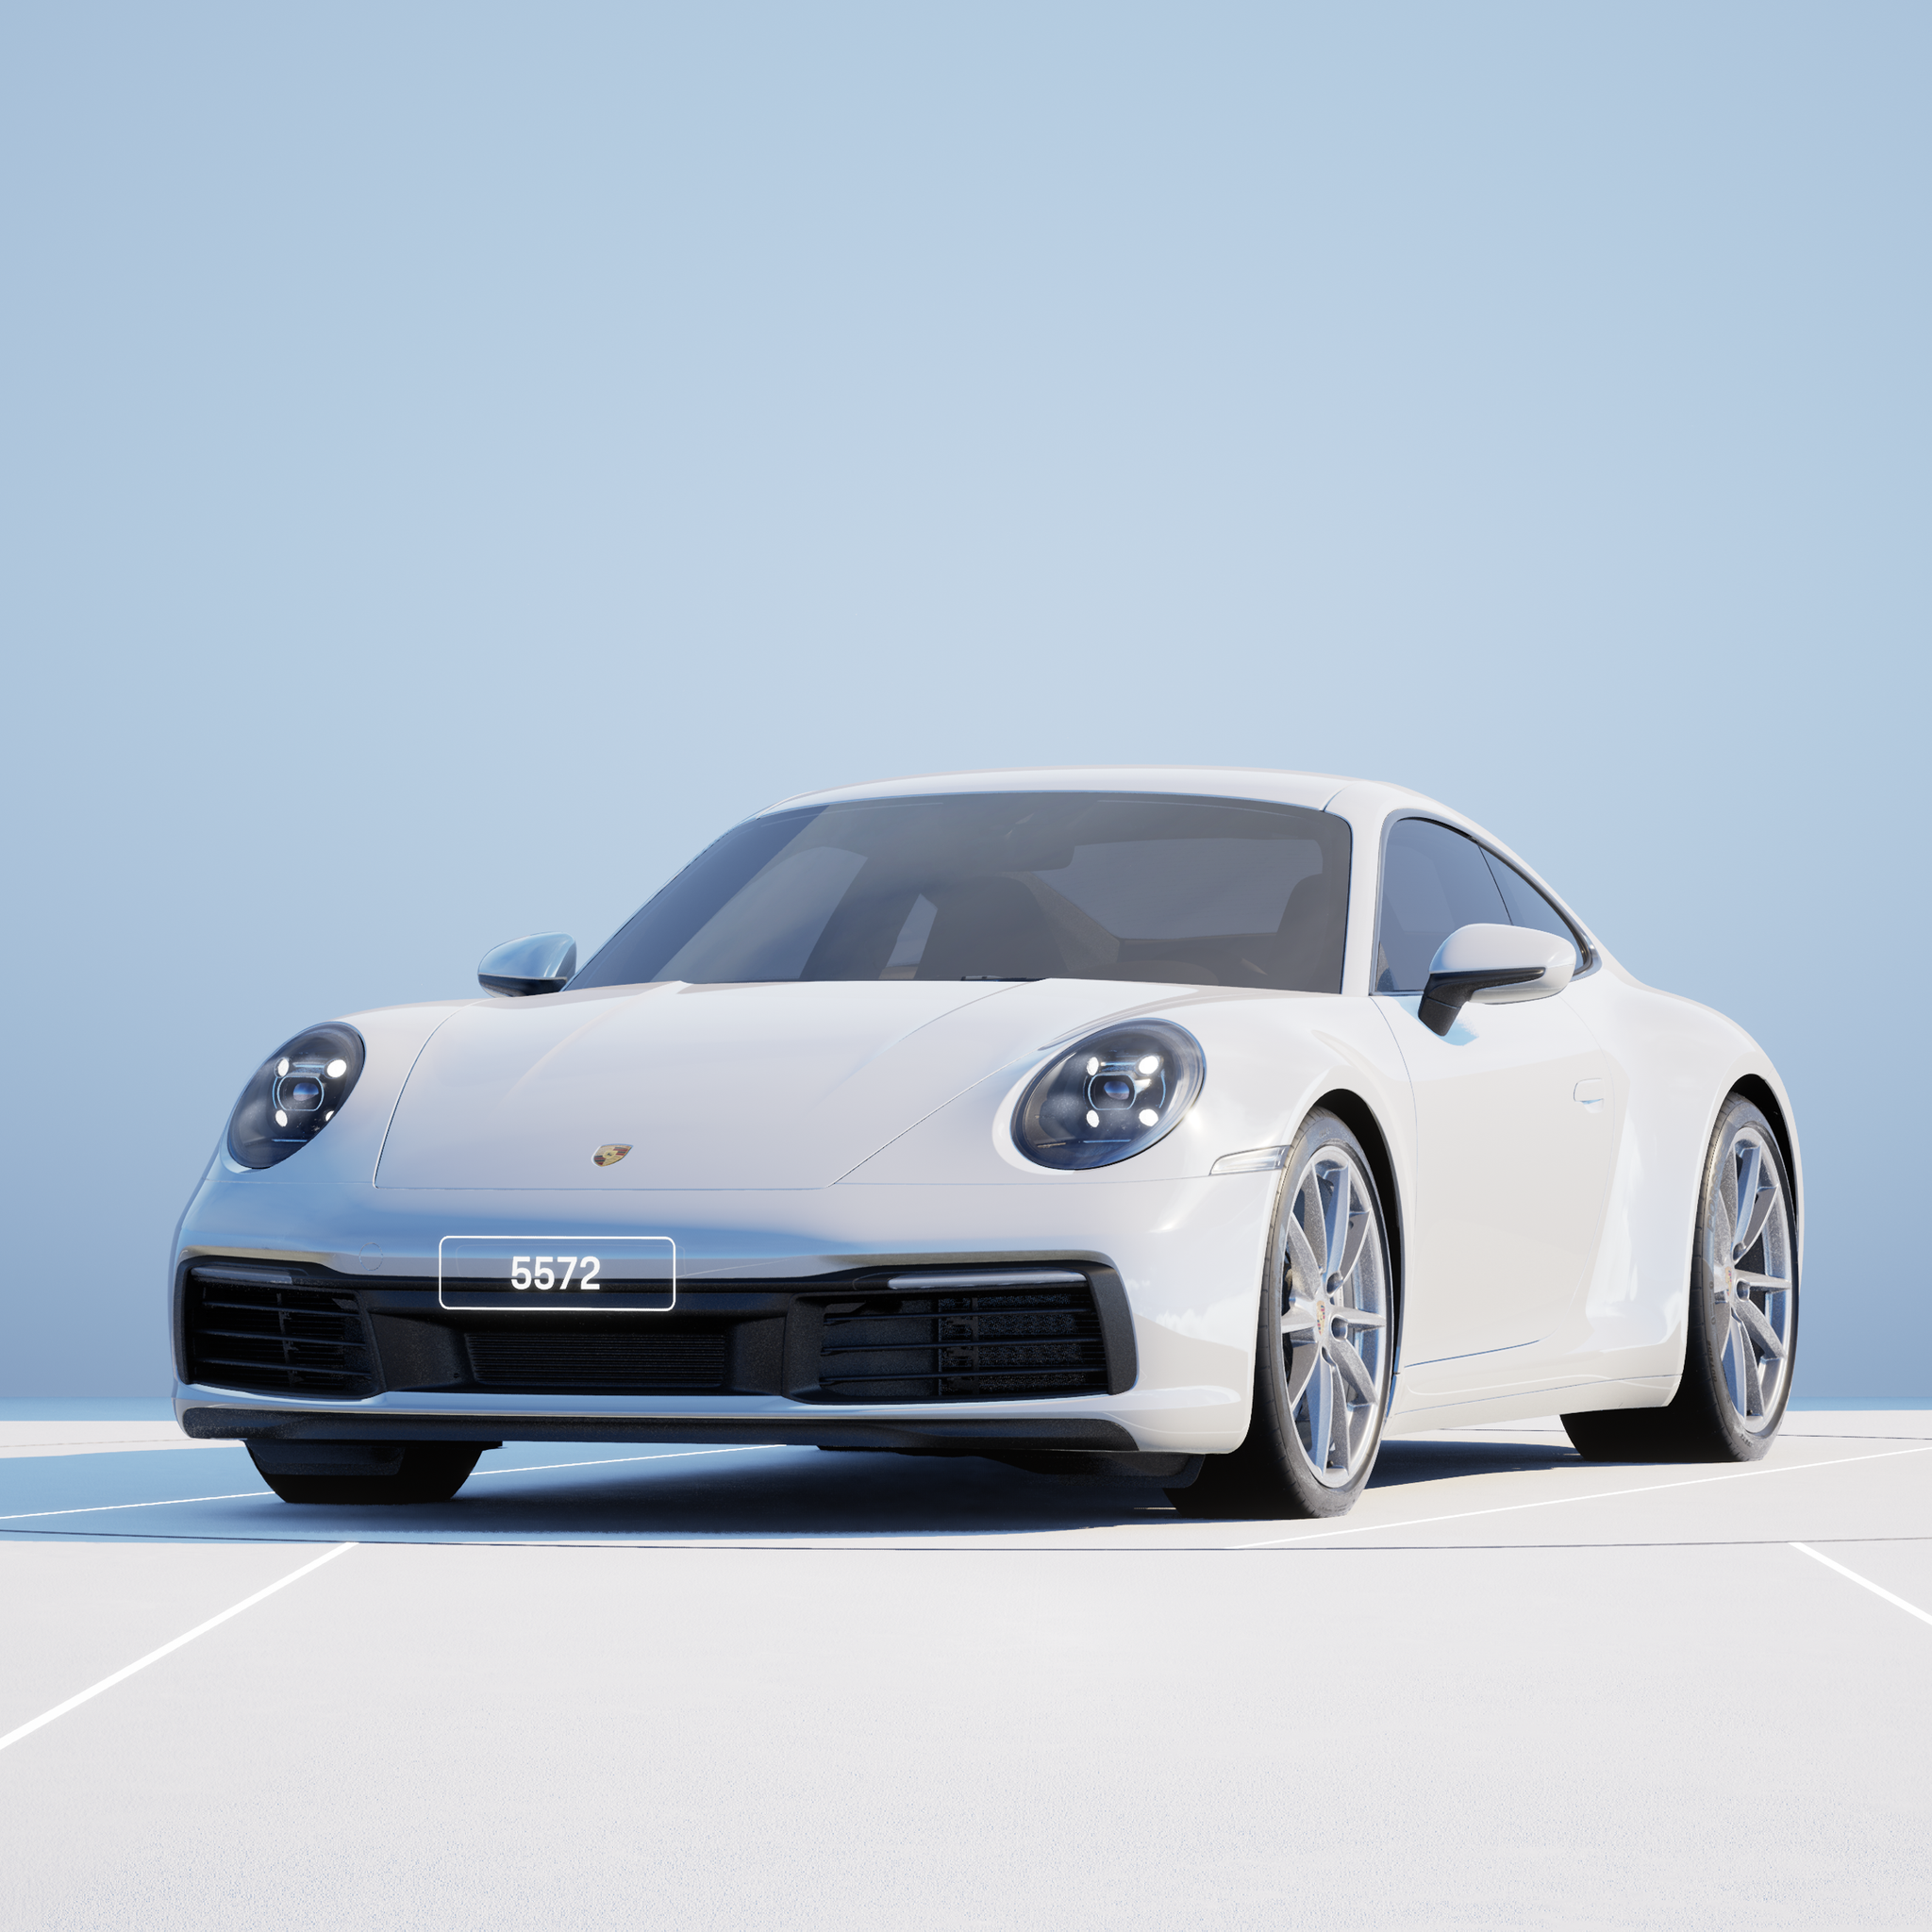 The PORSCHΞ 911 5572 image in phase